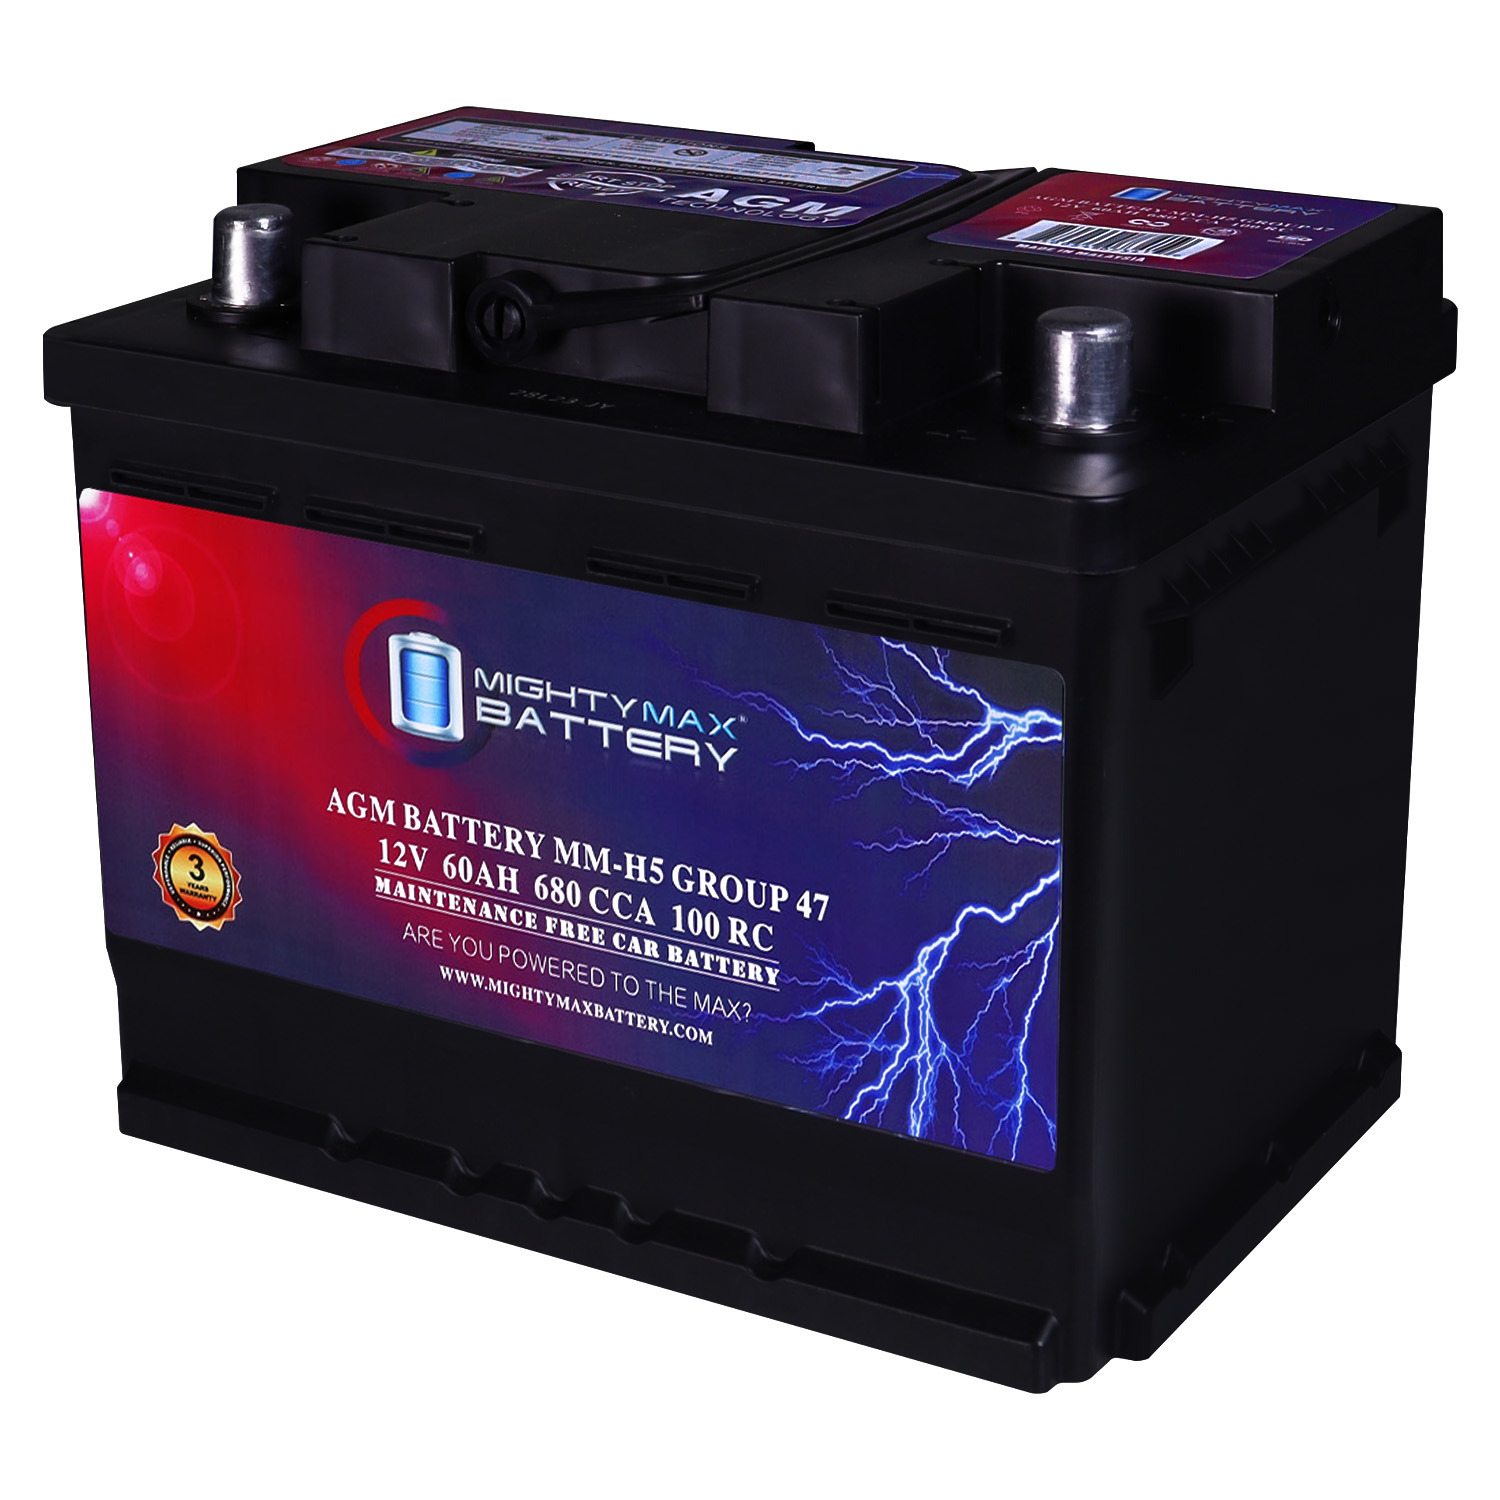 MM-H5 Group 47 12V 60AH 100RC 680CCA Replacement Battery Compatible with Peugeot 407 (Non-US/Canada) 04